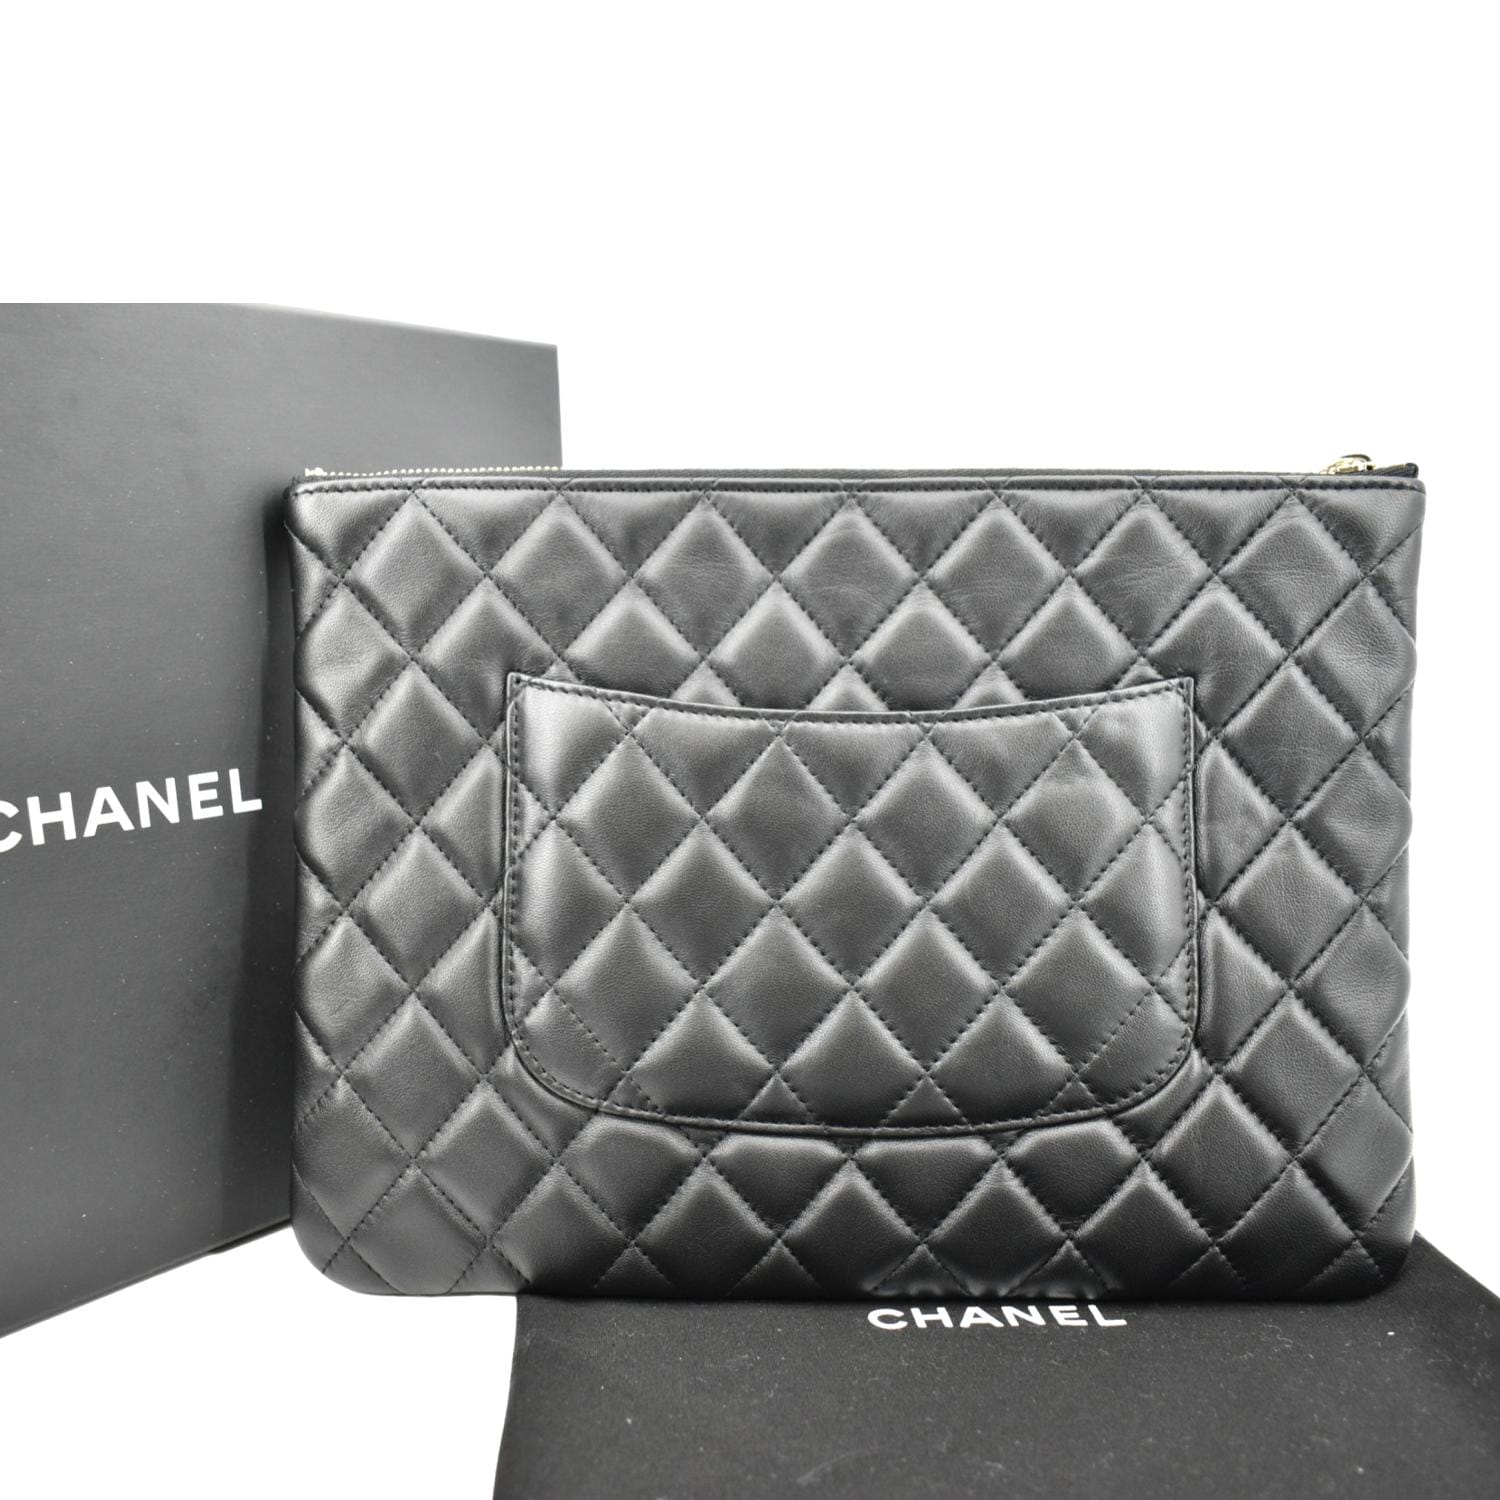 Chanel Black Quilted Lambskin Leather Classic Zip Pouch Chanel